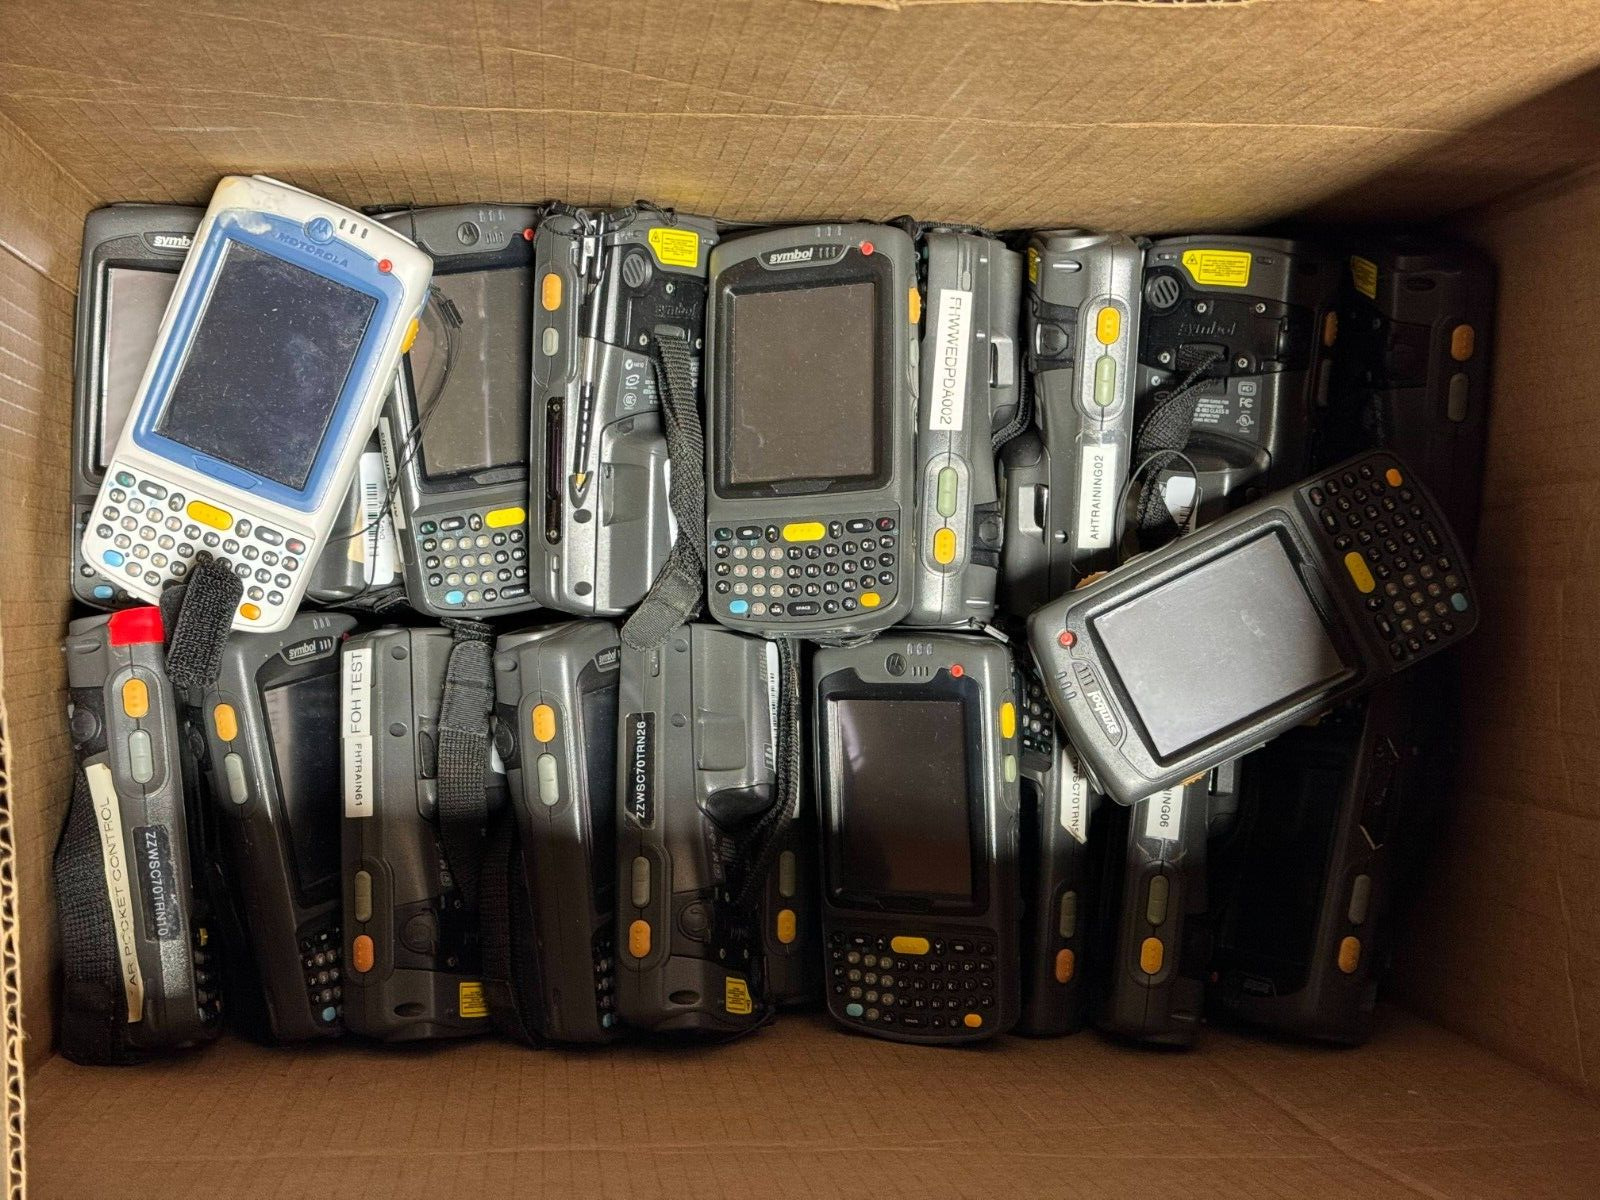 AS IS Motorola Symbol MC75A0 Mobile Handheld Computer lot of 57 not tested